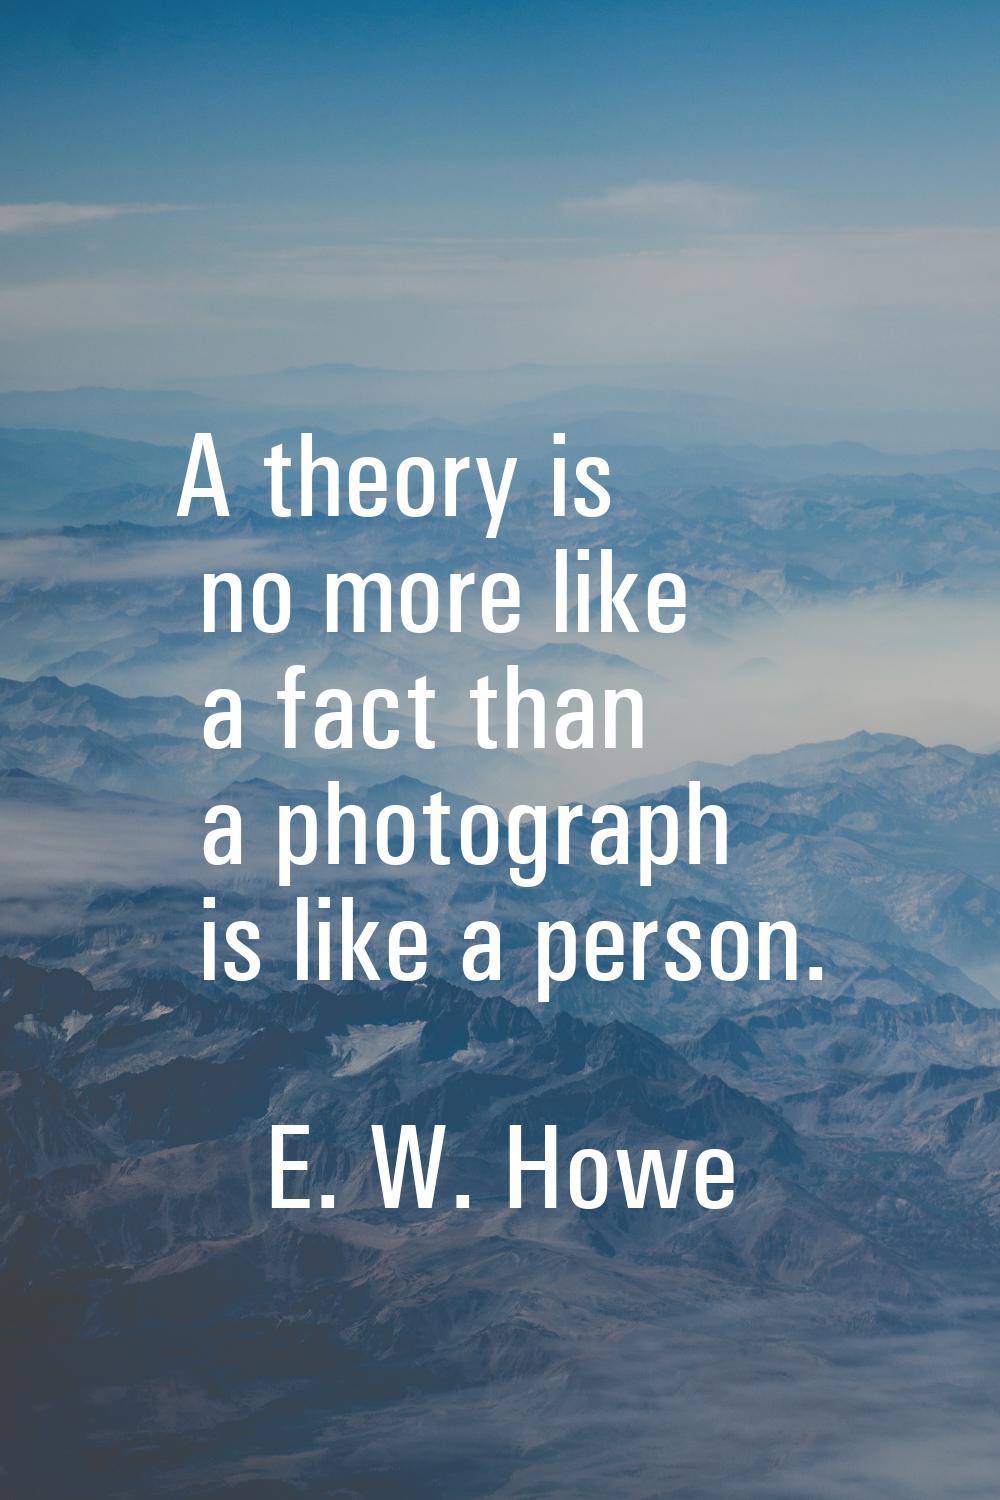 A theory is no more like a fact than a photograph is like a person.